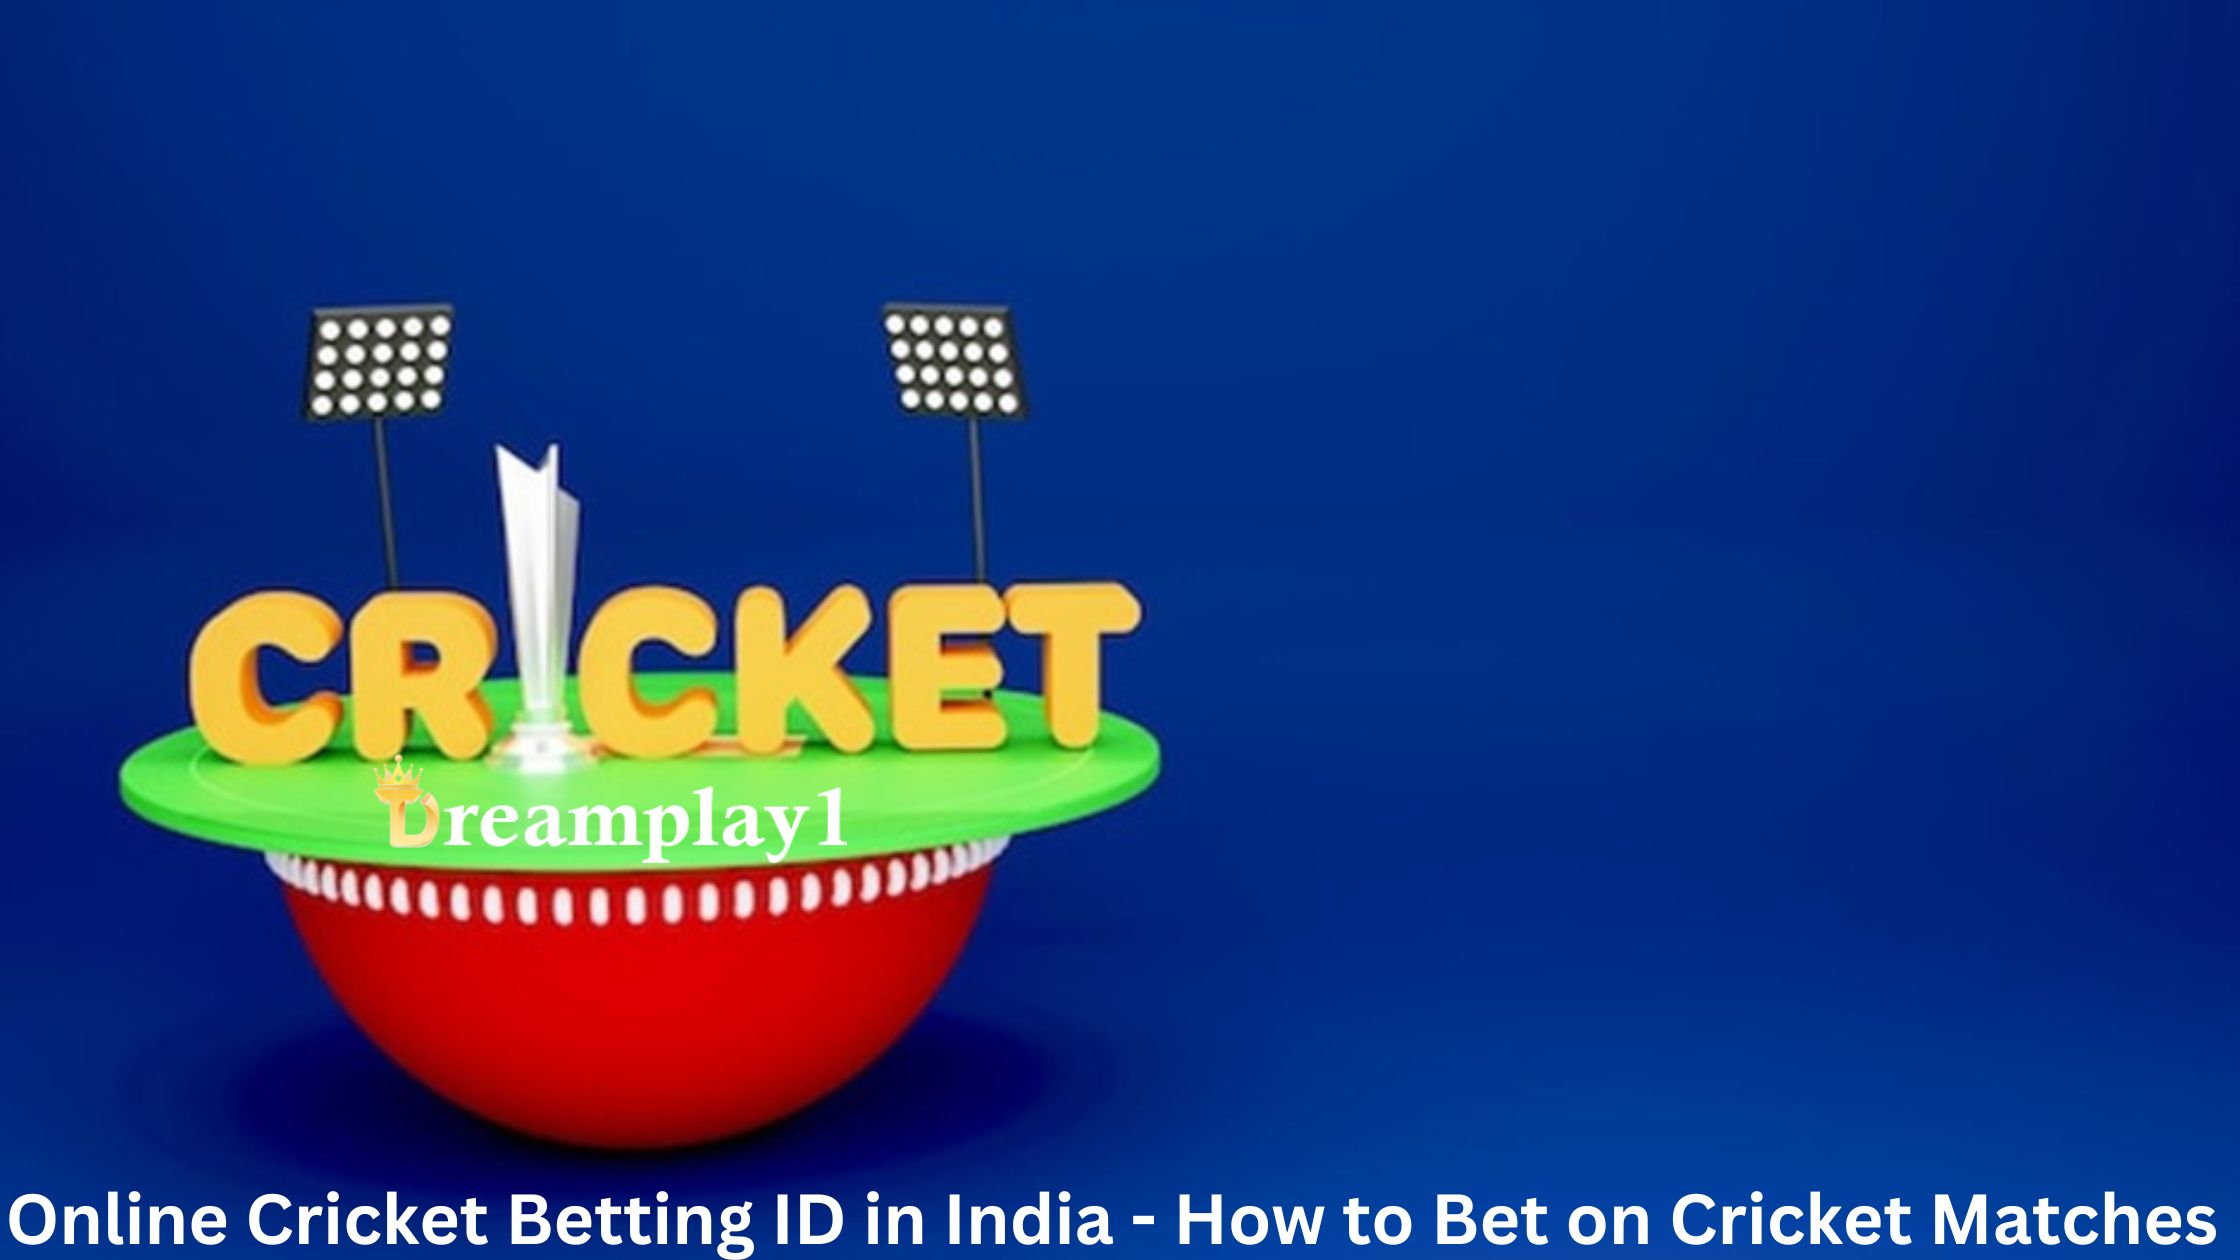 Online Cricket Betting Id in India